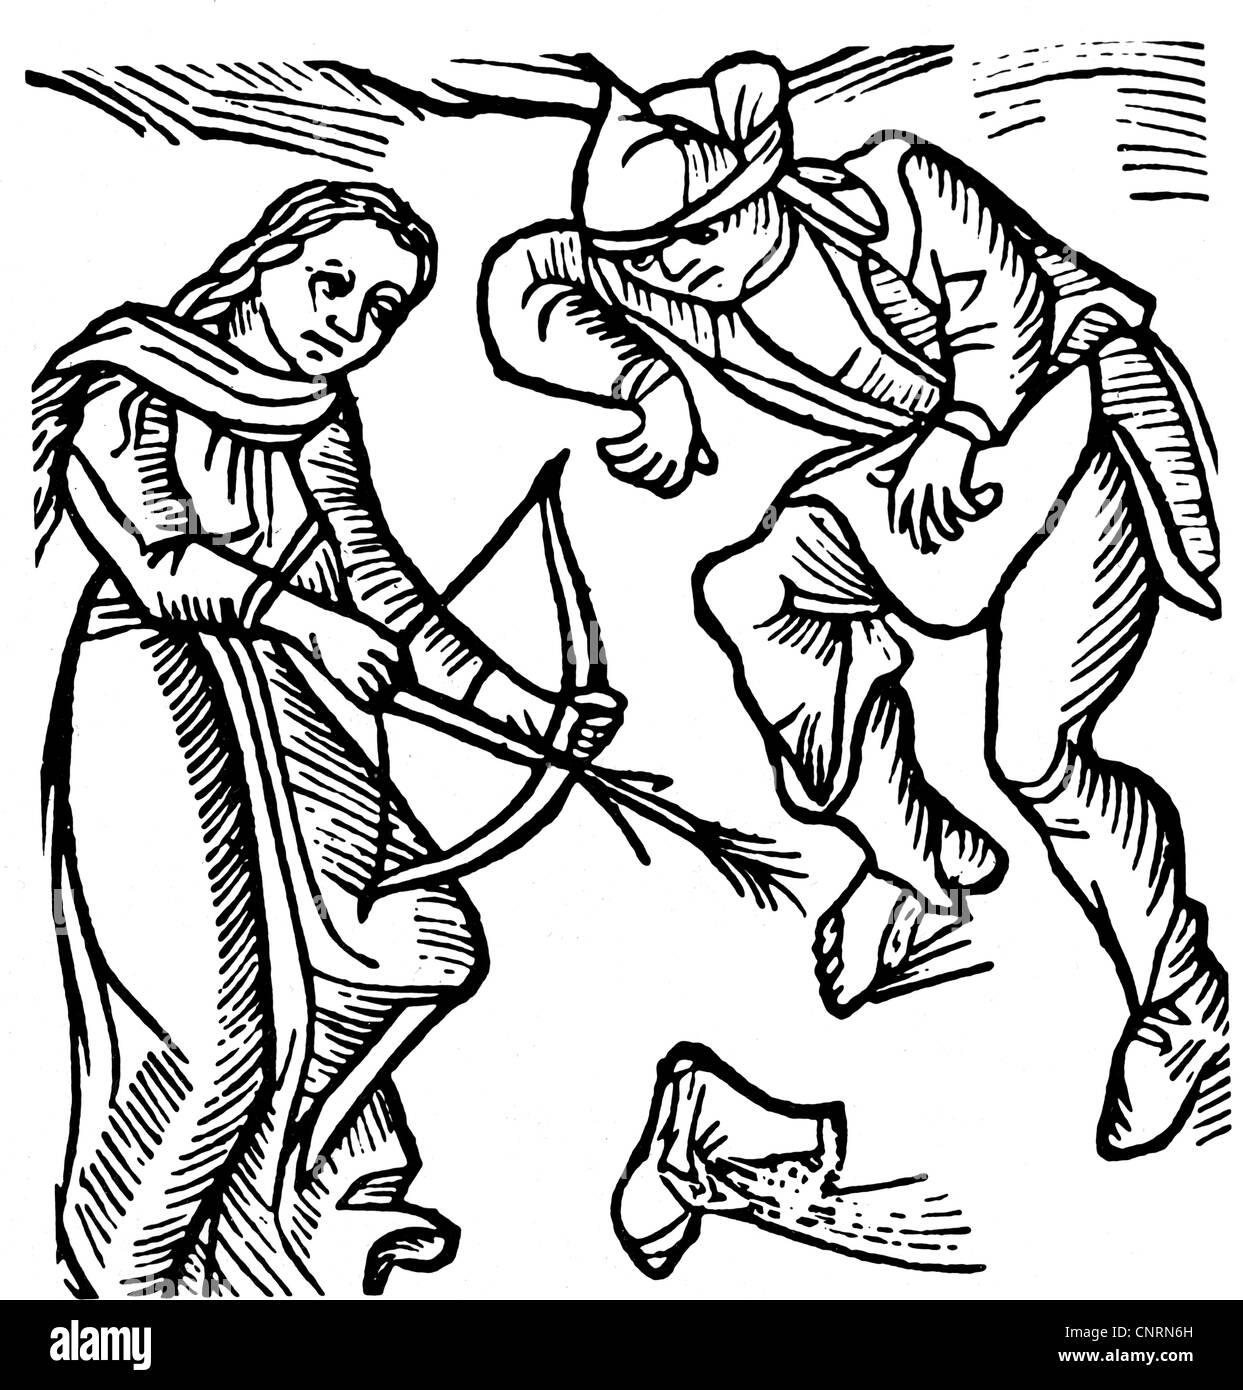 witches, a witch bewitching a man, woodcut, 'Tractatus de lamiis et phitonicis mulieribus' ('Of Witches and Diviner Women') by Ulrich Molitor, Ulm, 1489, Additional-Rights-Clearences-Not Available Stock Photo